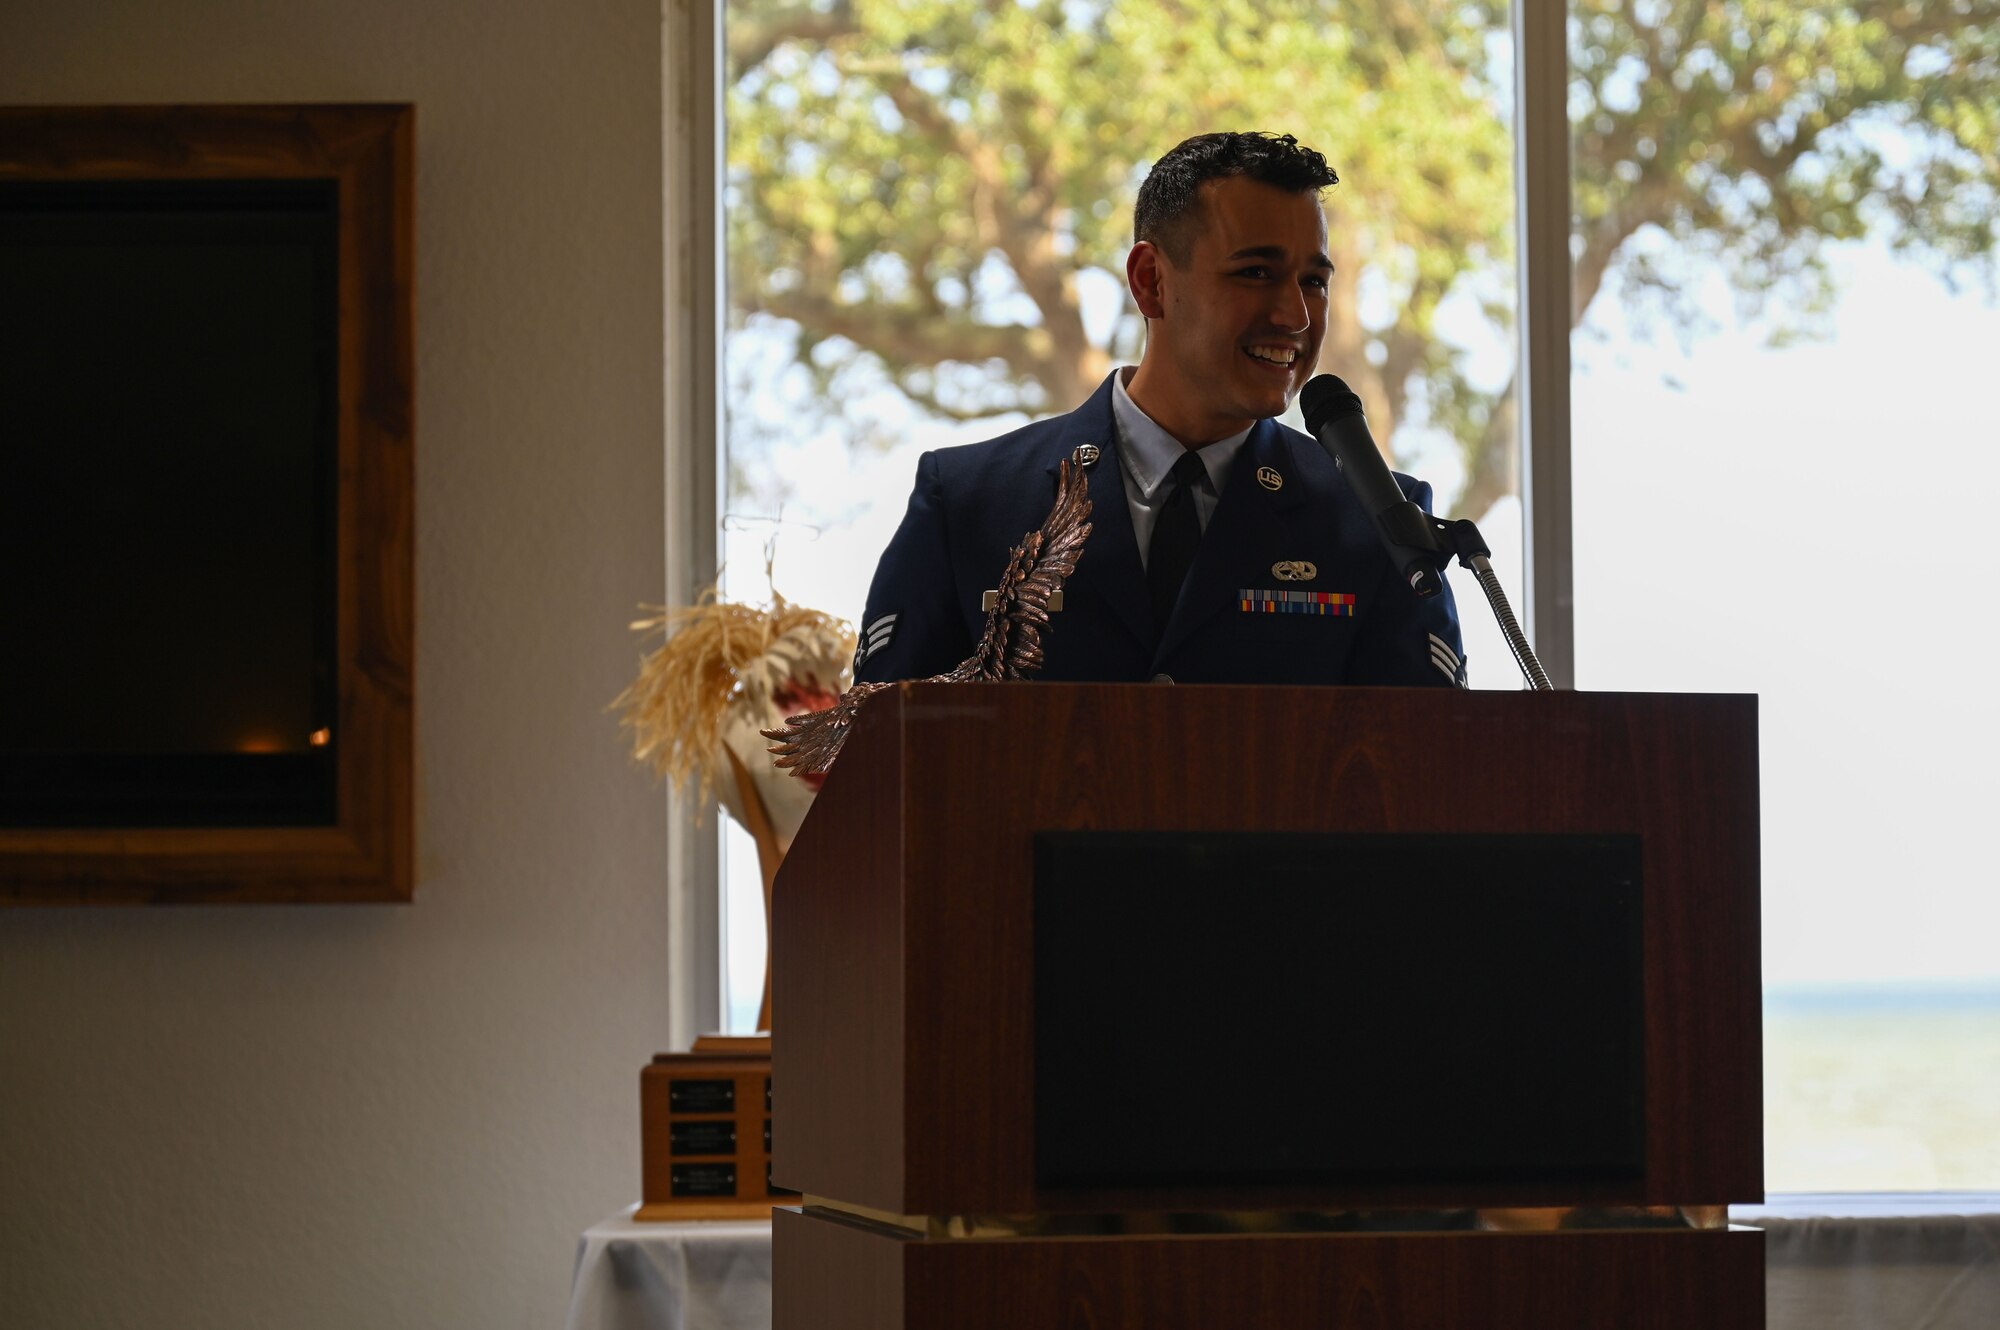 Senior Airman Anthony Karam, 16th Electronic Warfare Squadron avionics technician, gives a speech during Airman Leadership School (ALS) class 23-D graduation after receiving the John L. Levitow Award at Eglin Air Force Base, Fla., May 11, 2023. The John L. Levitow Award is the highest award for enlisted Professional Military Education in the Air Force and is presented to the student who demonstrates the most outstanding leadership and scholastic achievement throughout ALS. (U.S. Air Force photo by Staff Sgt. Ericka A. Woolever)